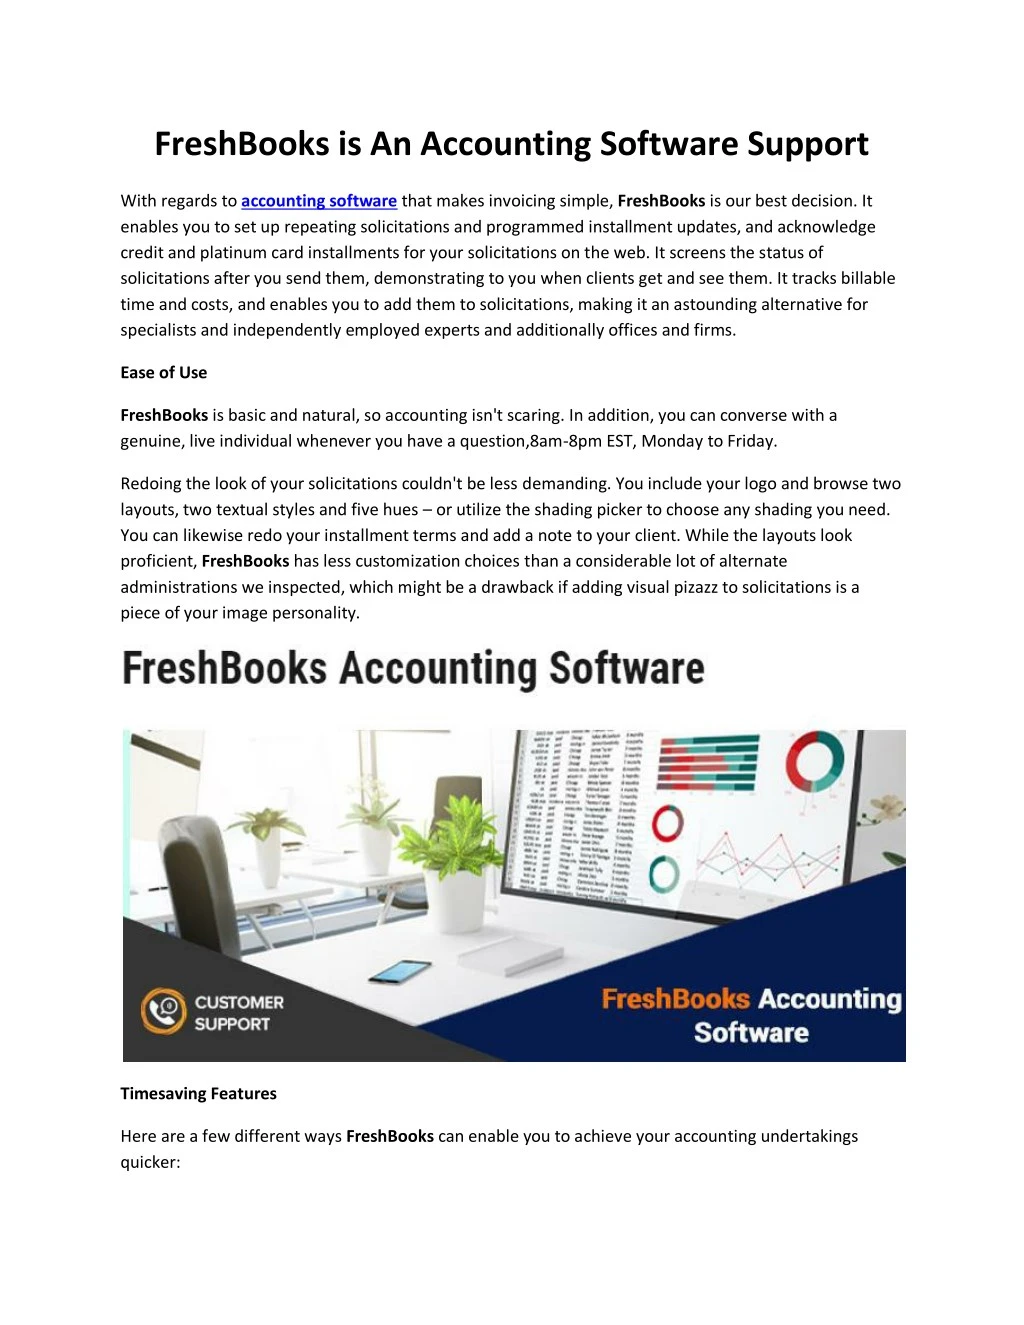 freshbooks is an accounting software support